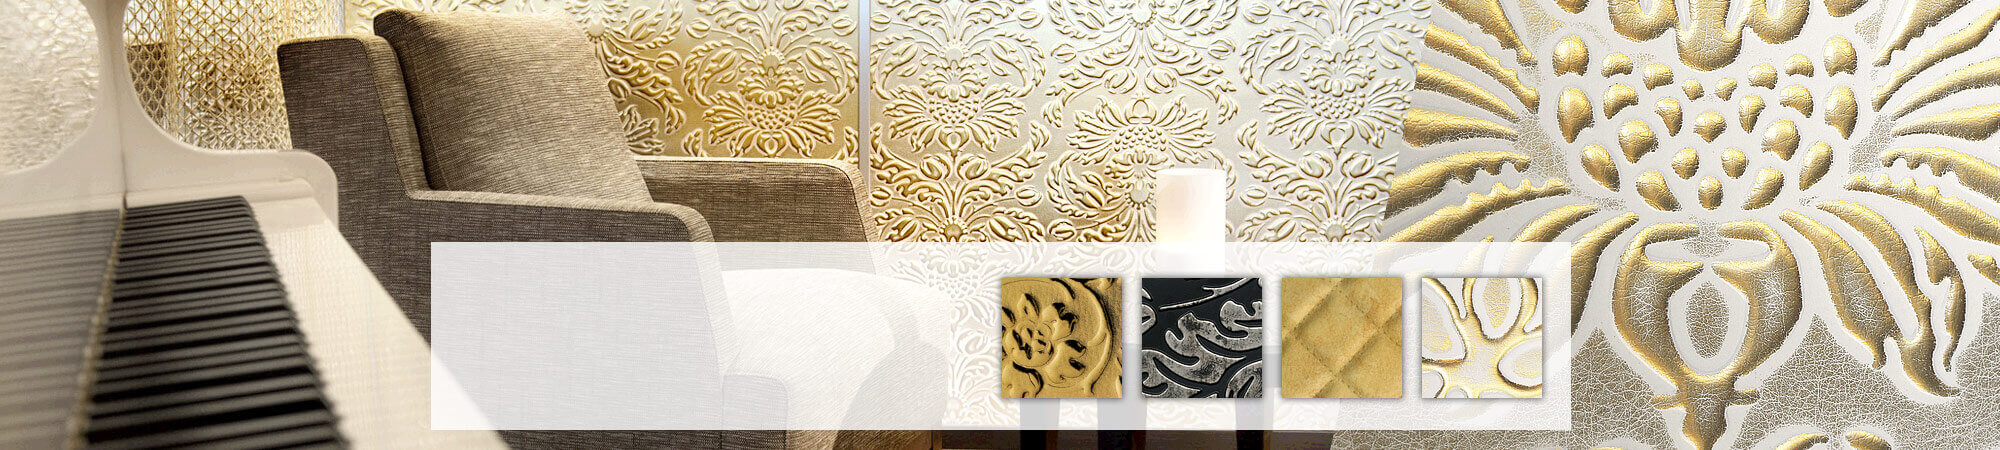 TIMELESS & ELEGANT / High-quality wall panels in classical design